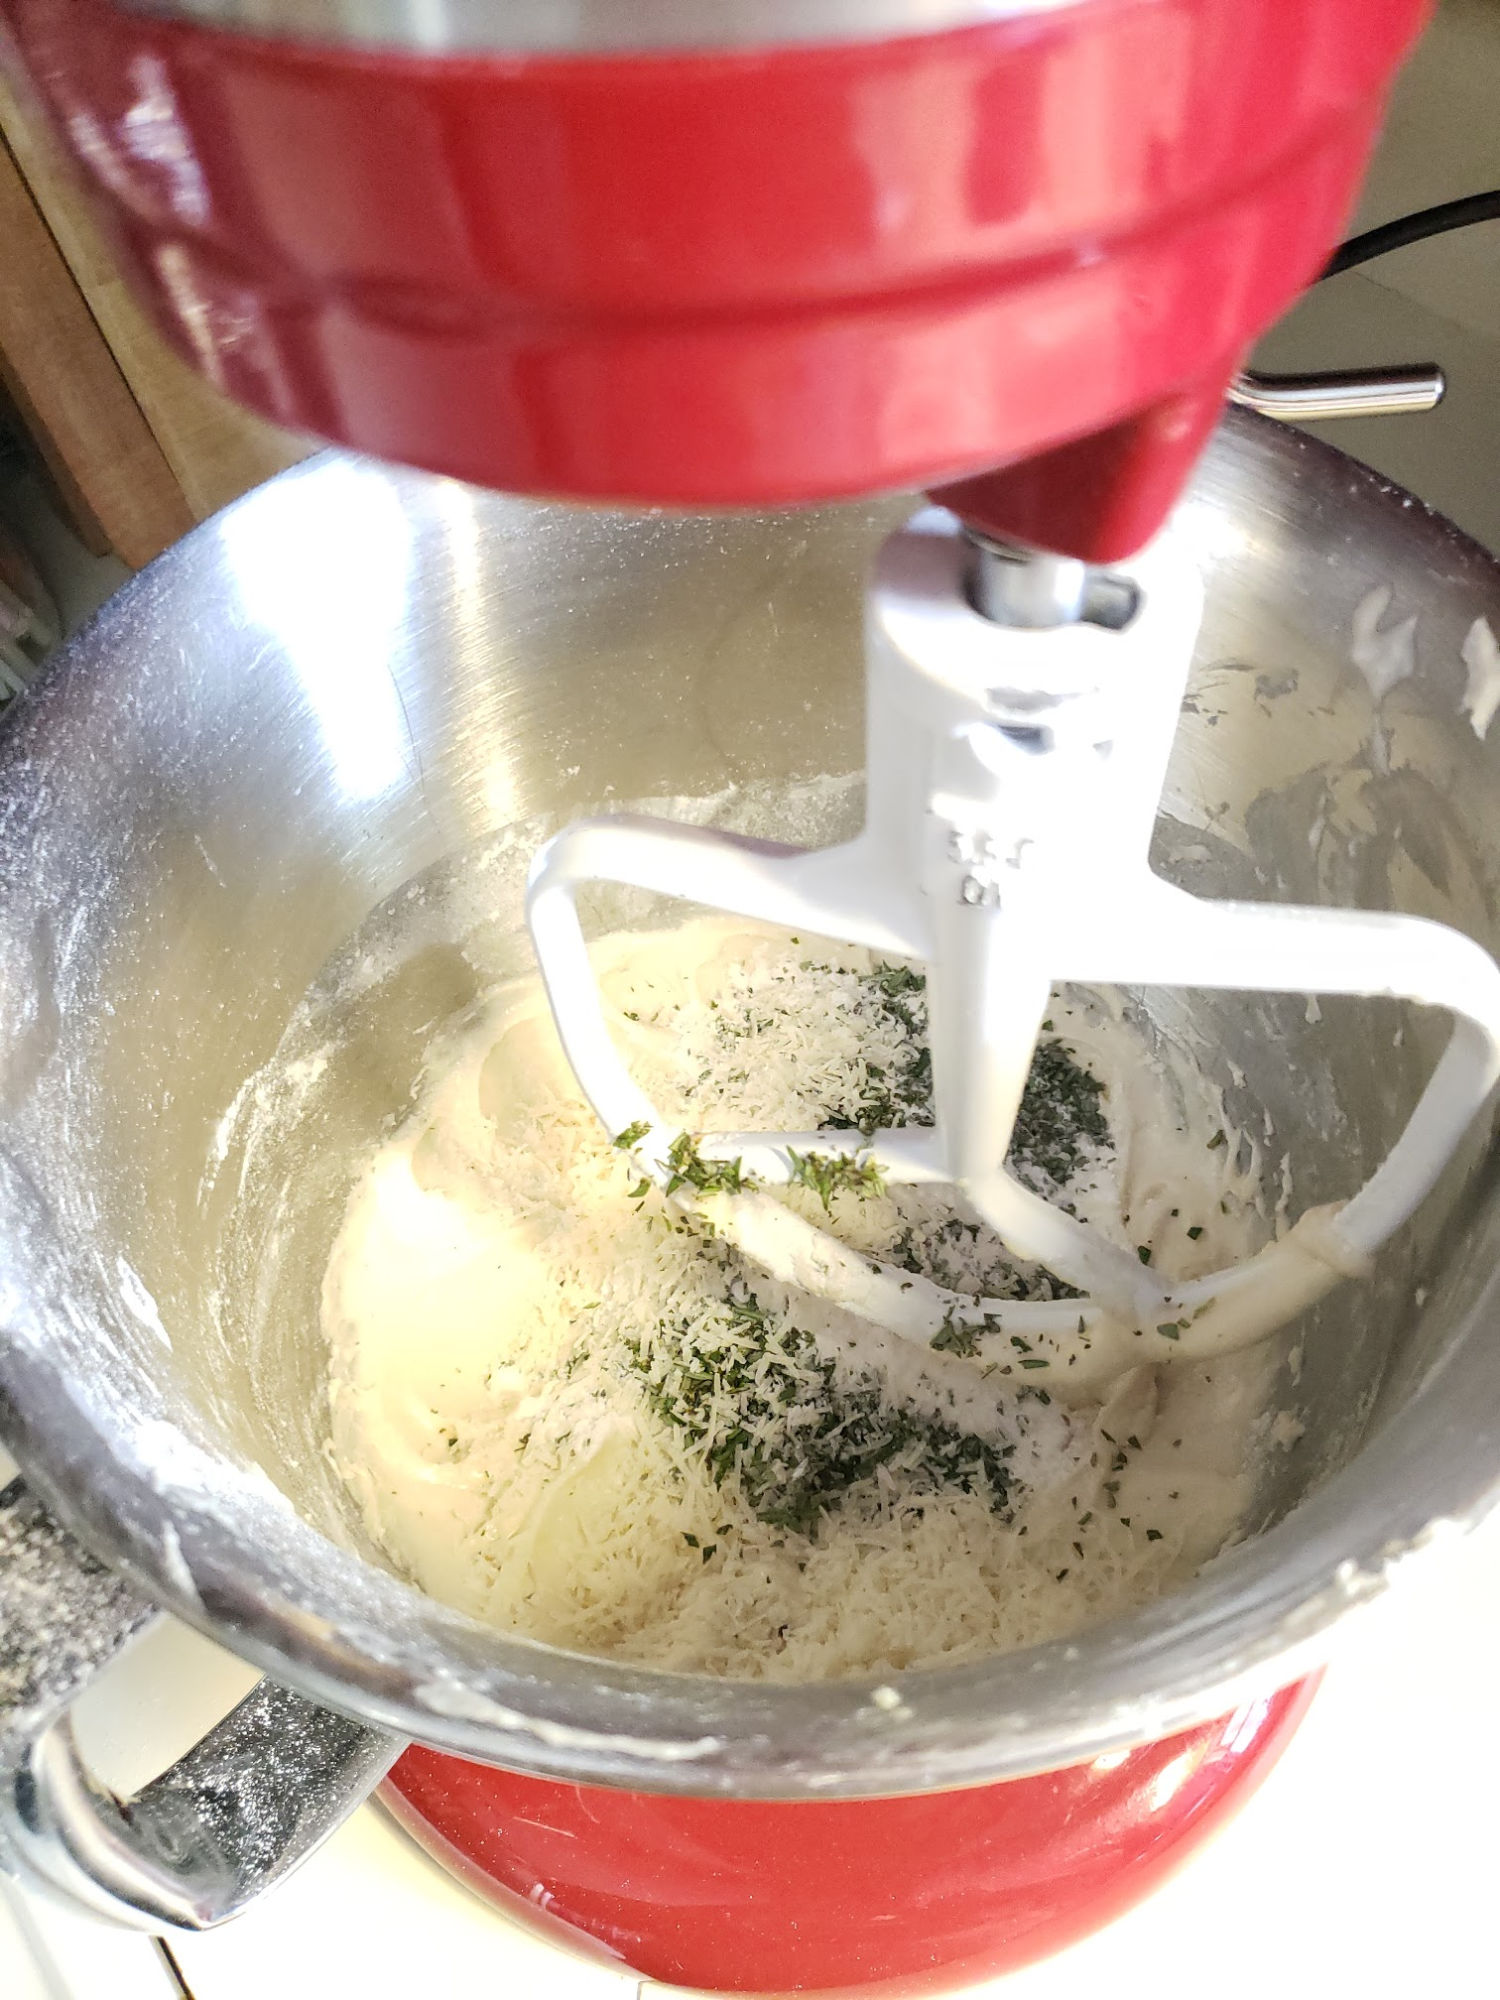 Red kitchenaid mixer with yeast dinner rolls dough in bowl